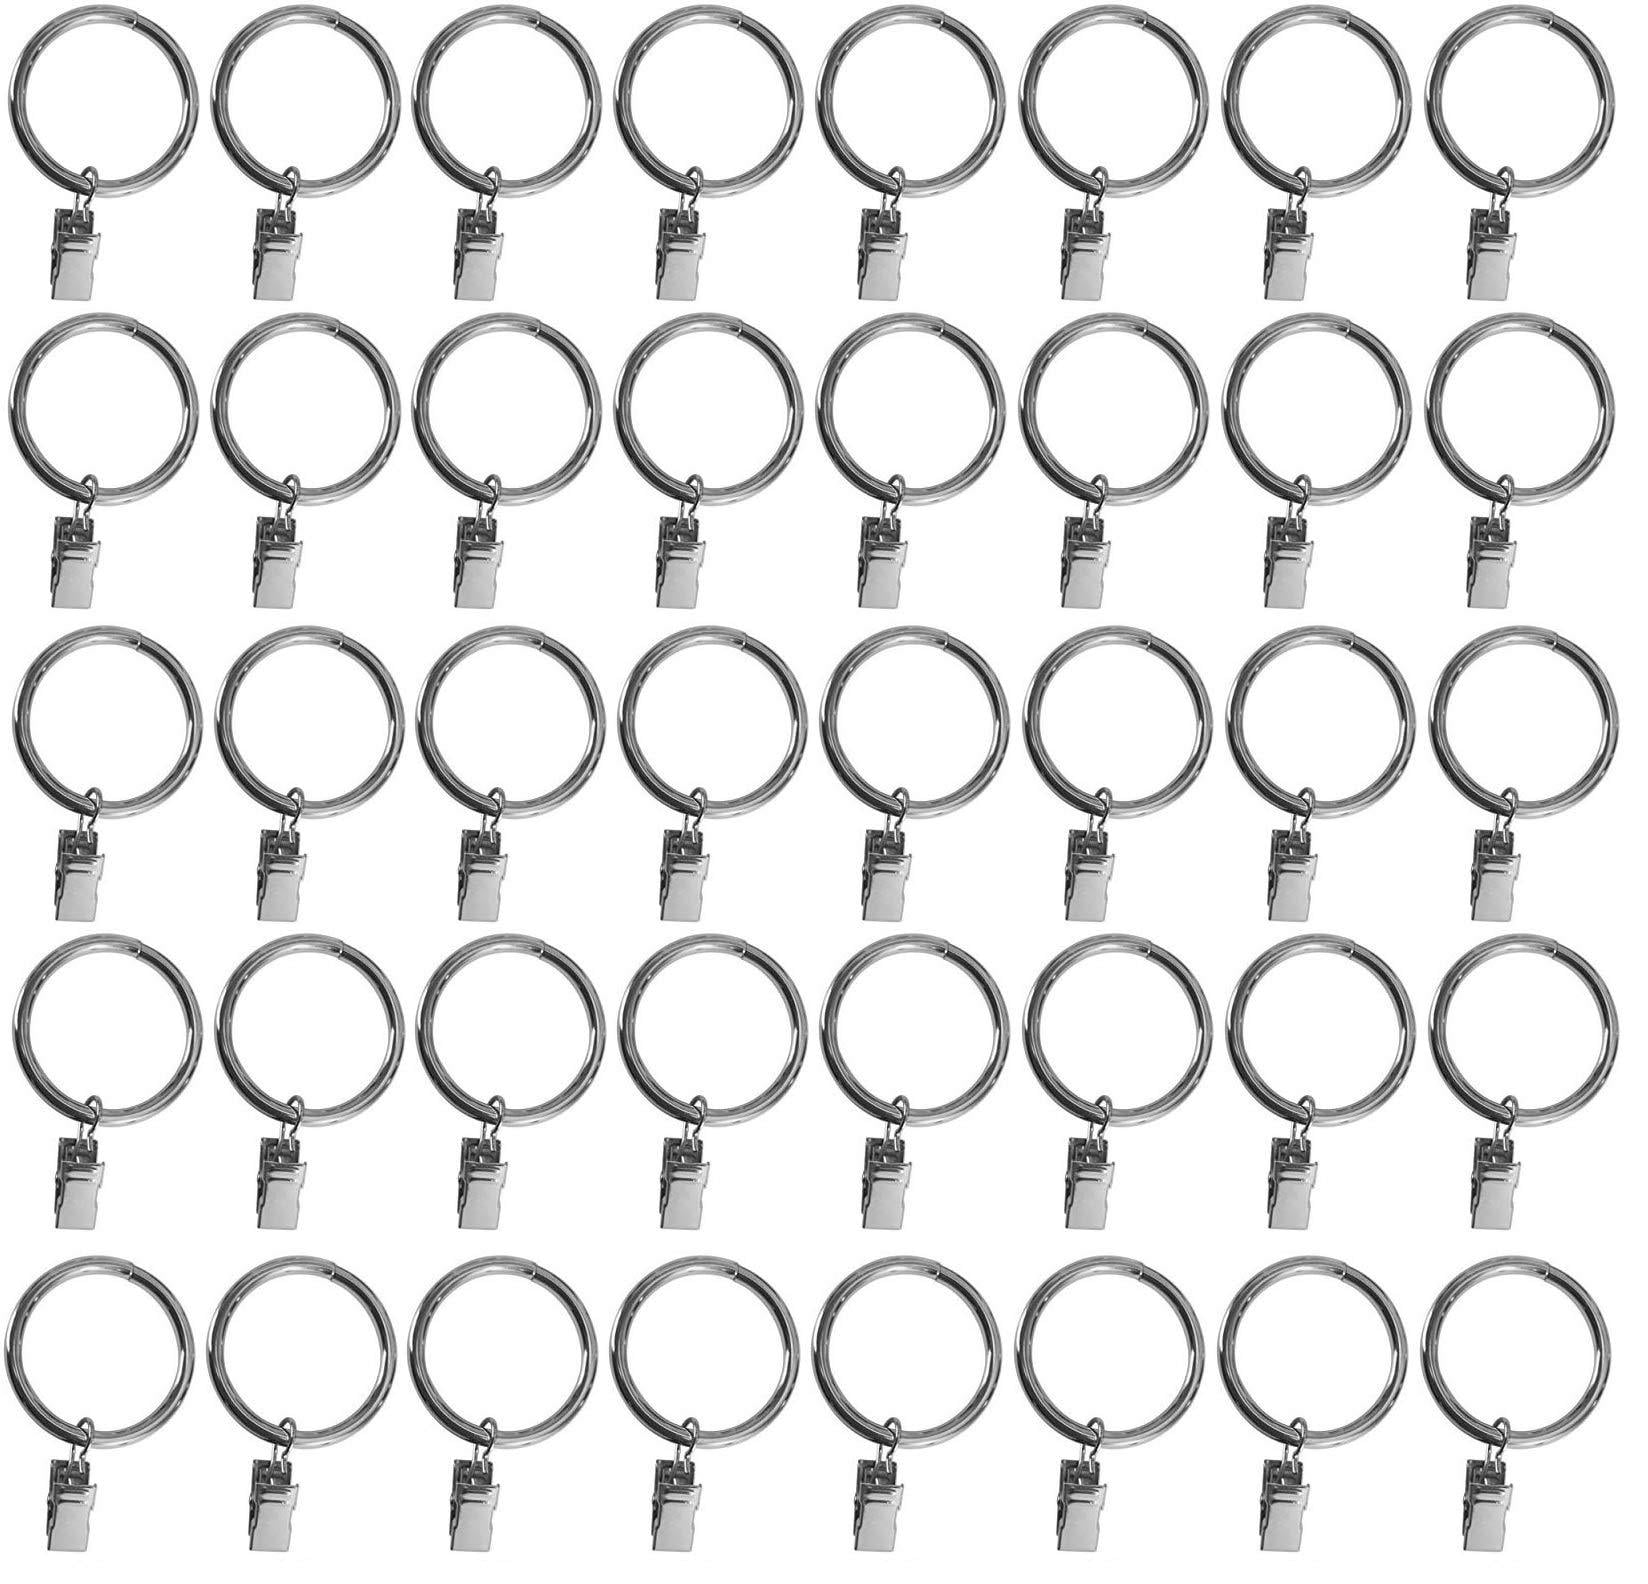 Set of 30 Metal Curtain Rings with Clips and Eyelets 2-inch Black Also kn... 